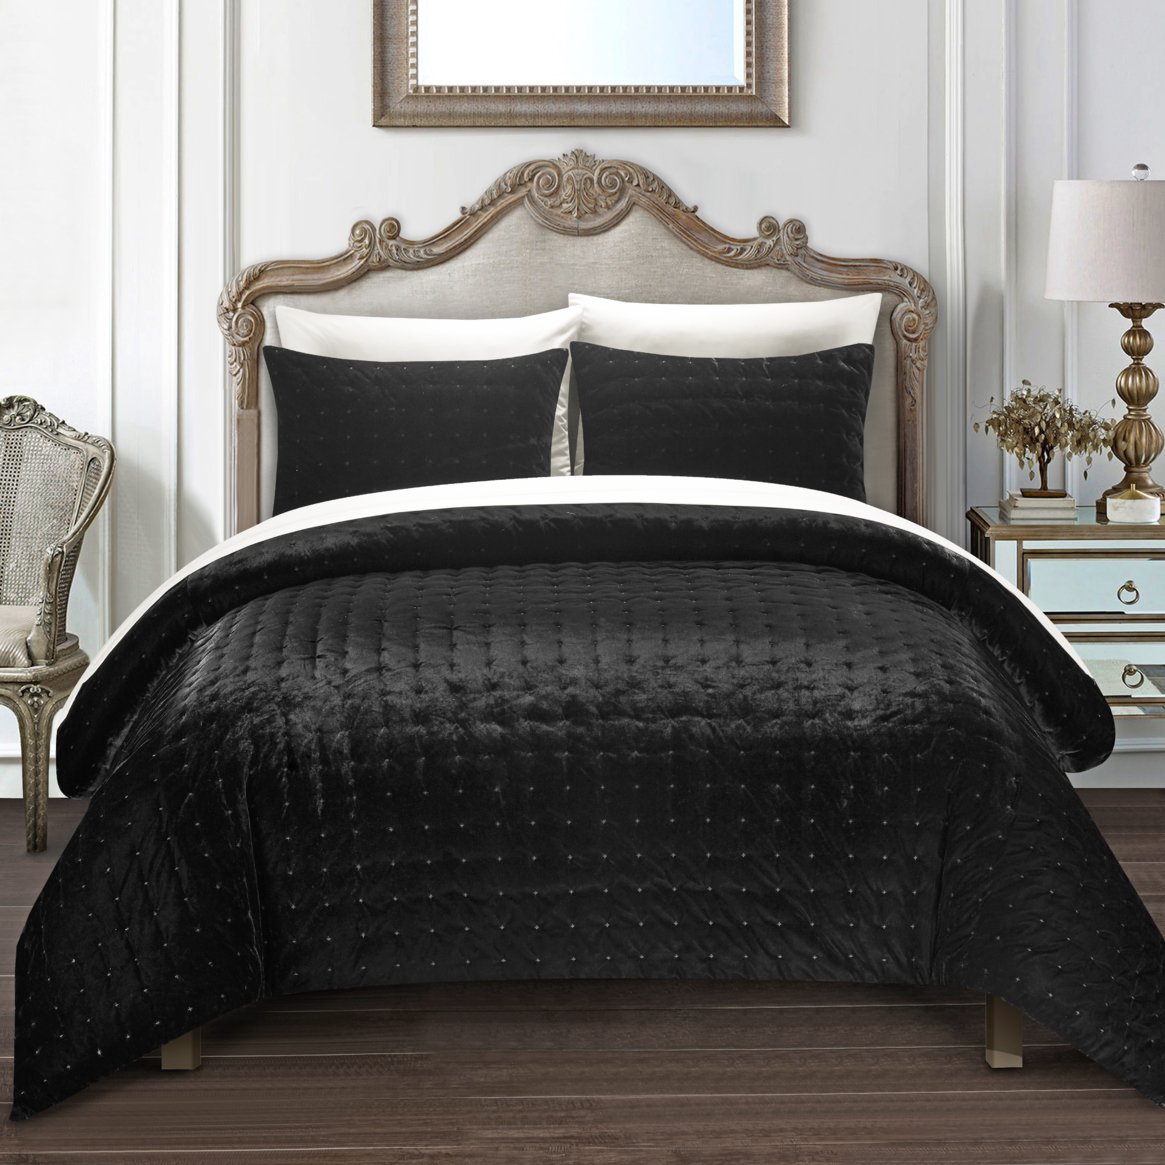 Chaya 7 Piece Comforter Set Luxurious Hand Stitched Velvet Bed In A Bag Bedding - Black, Queen